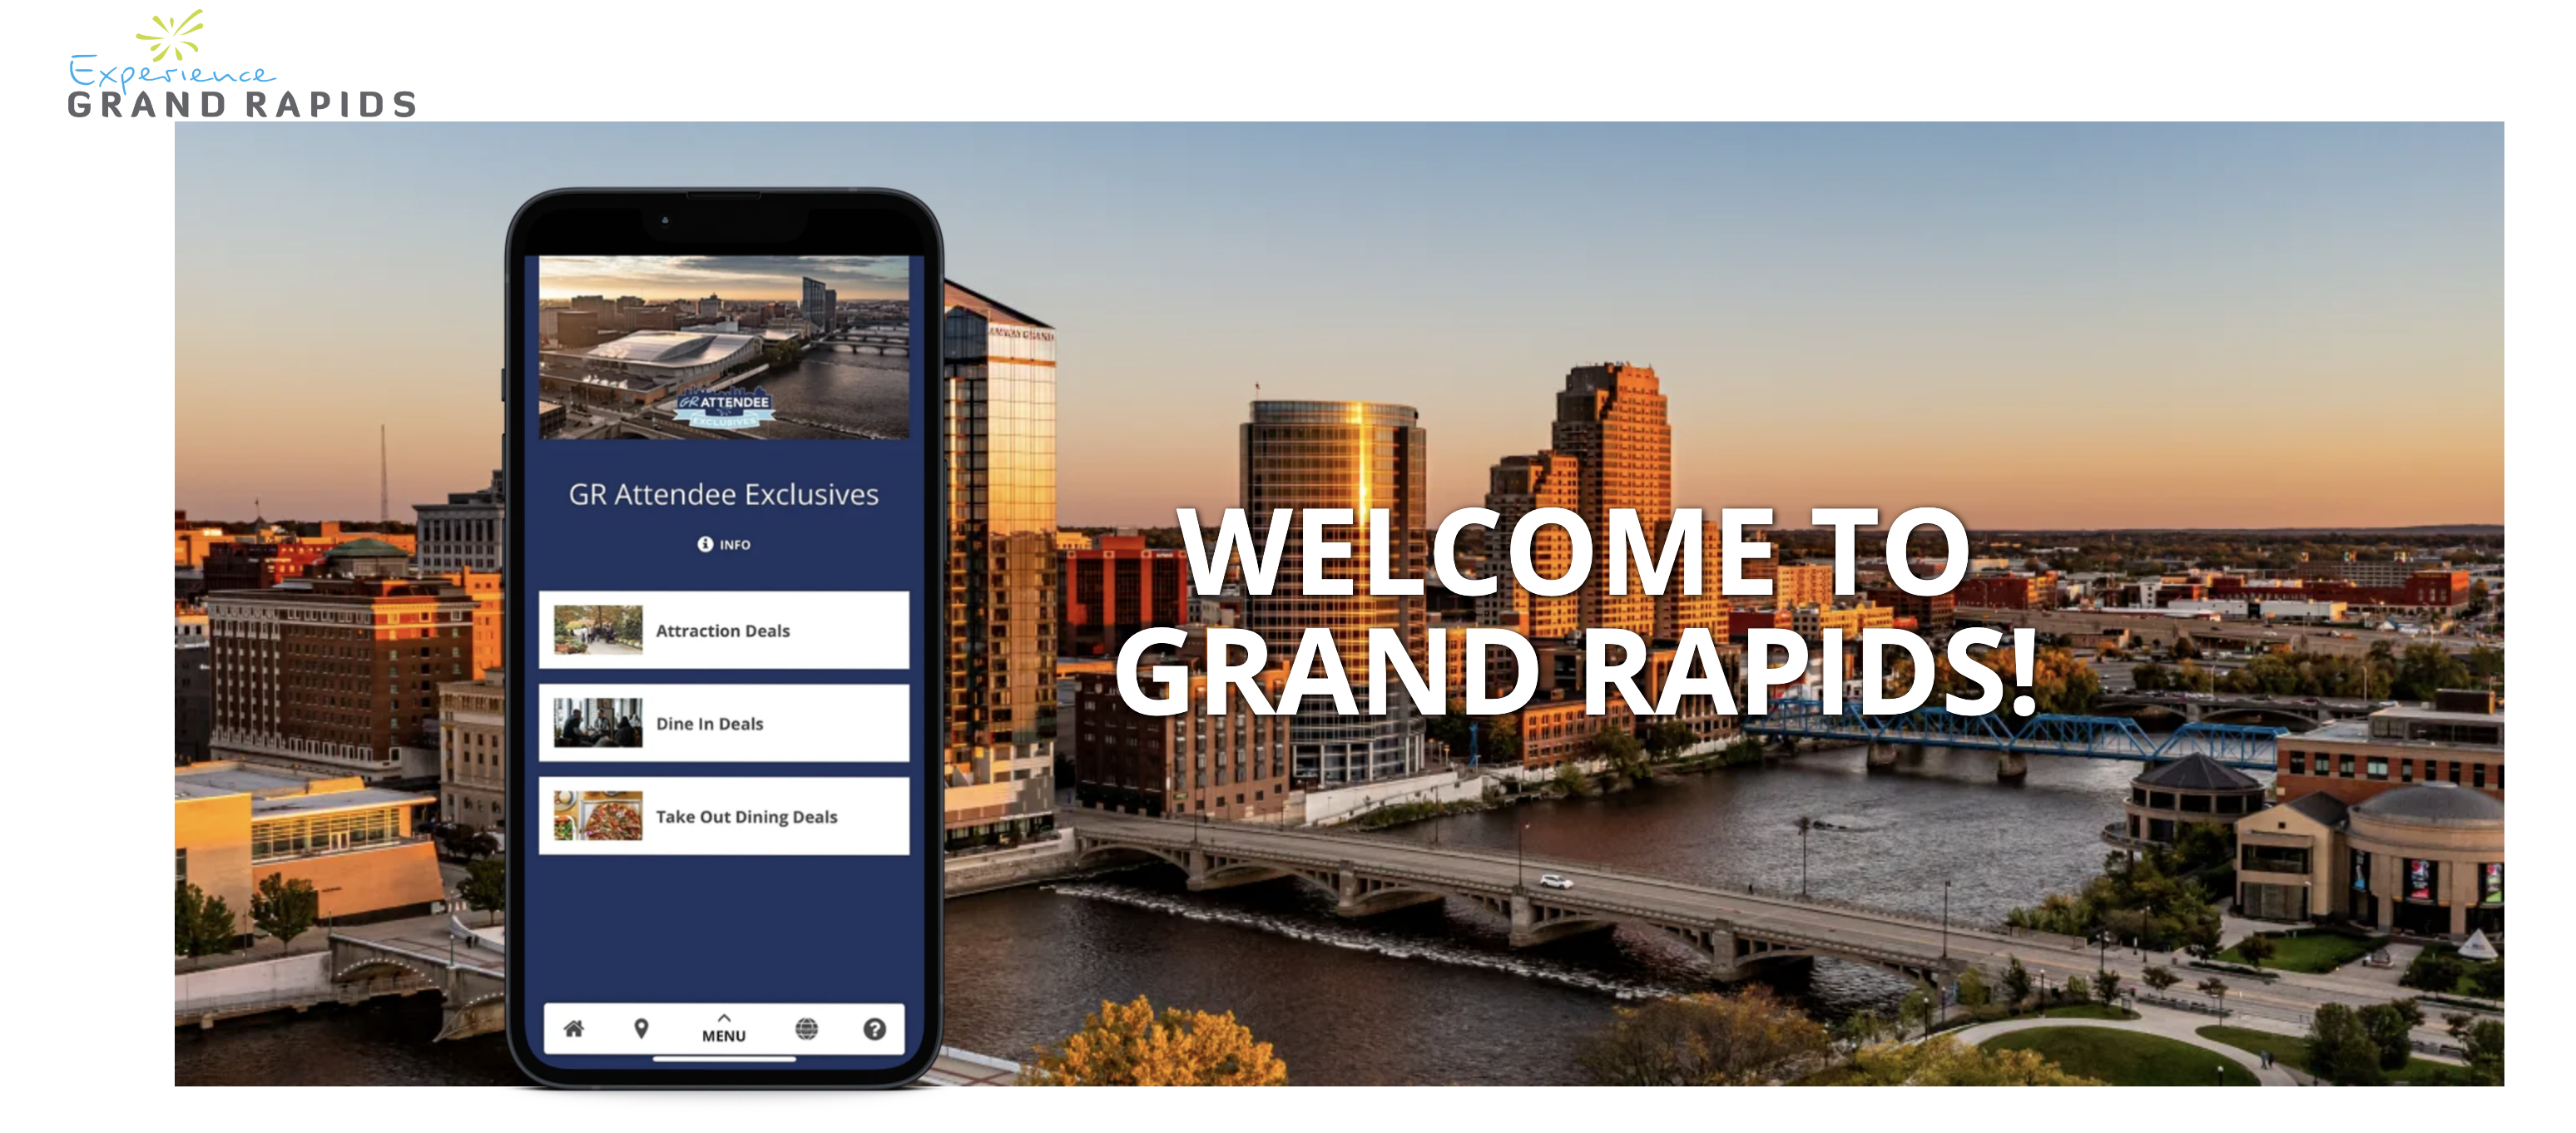 https://visit.experiencegr.com/checkout/142/experience-grand-rapids/2122/gr-attendee-exclusives